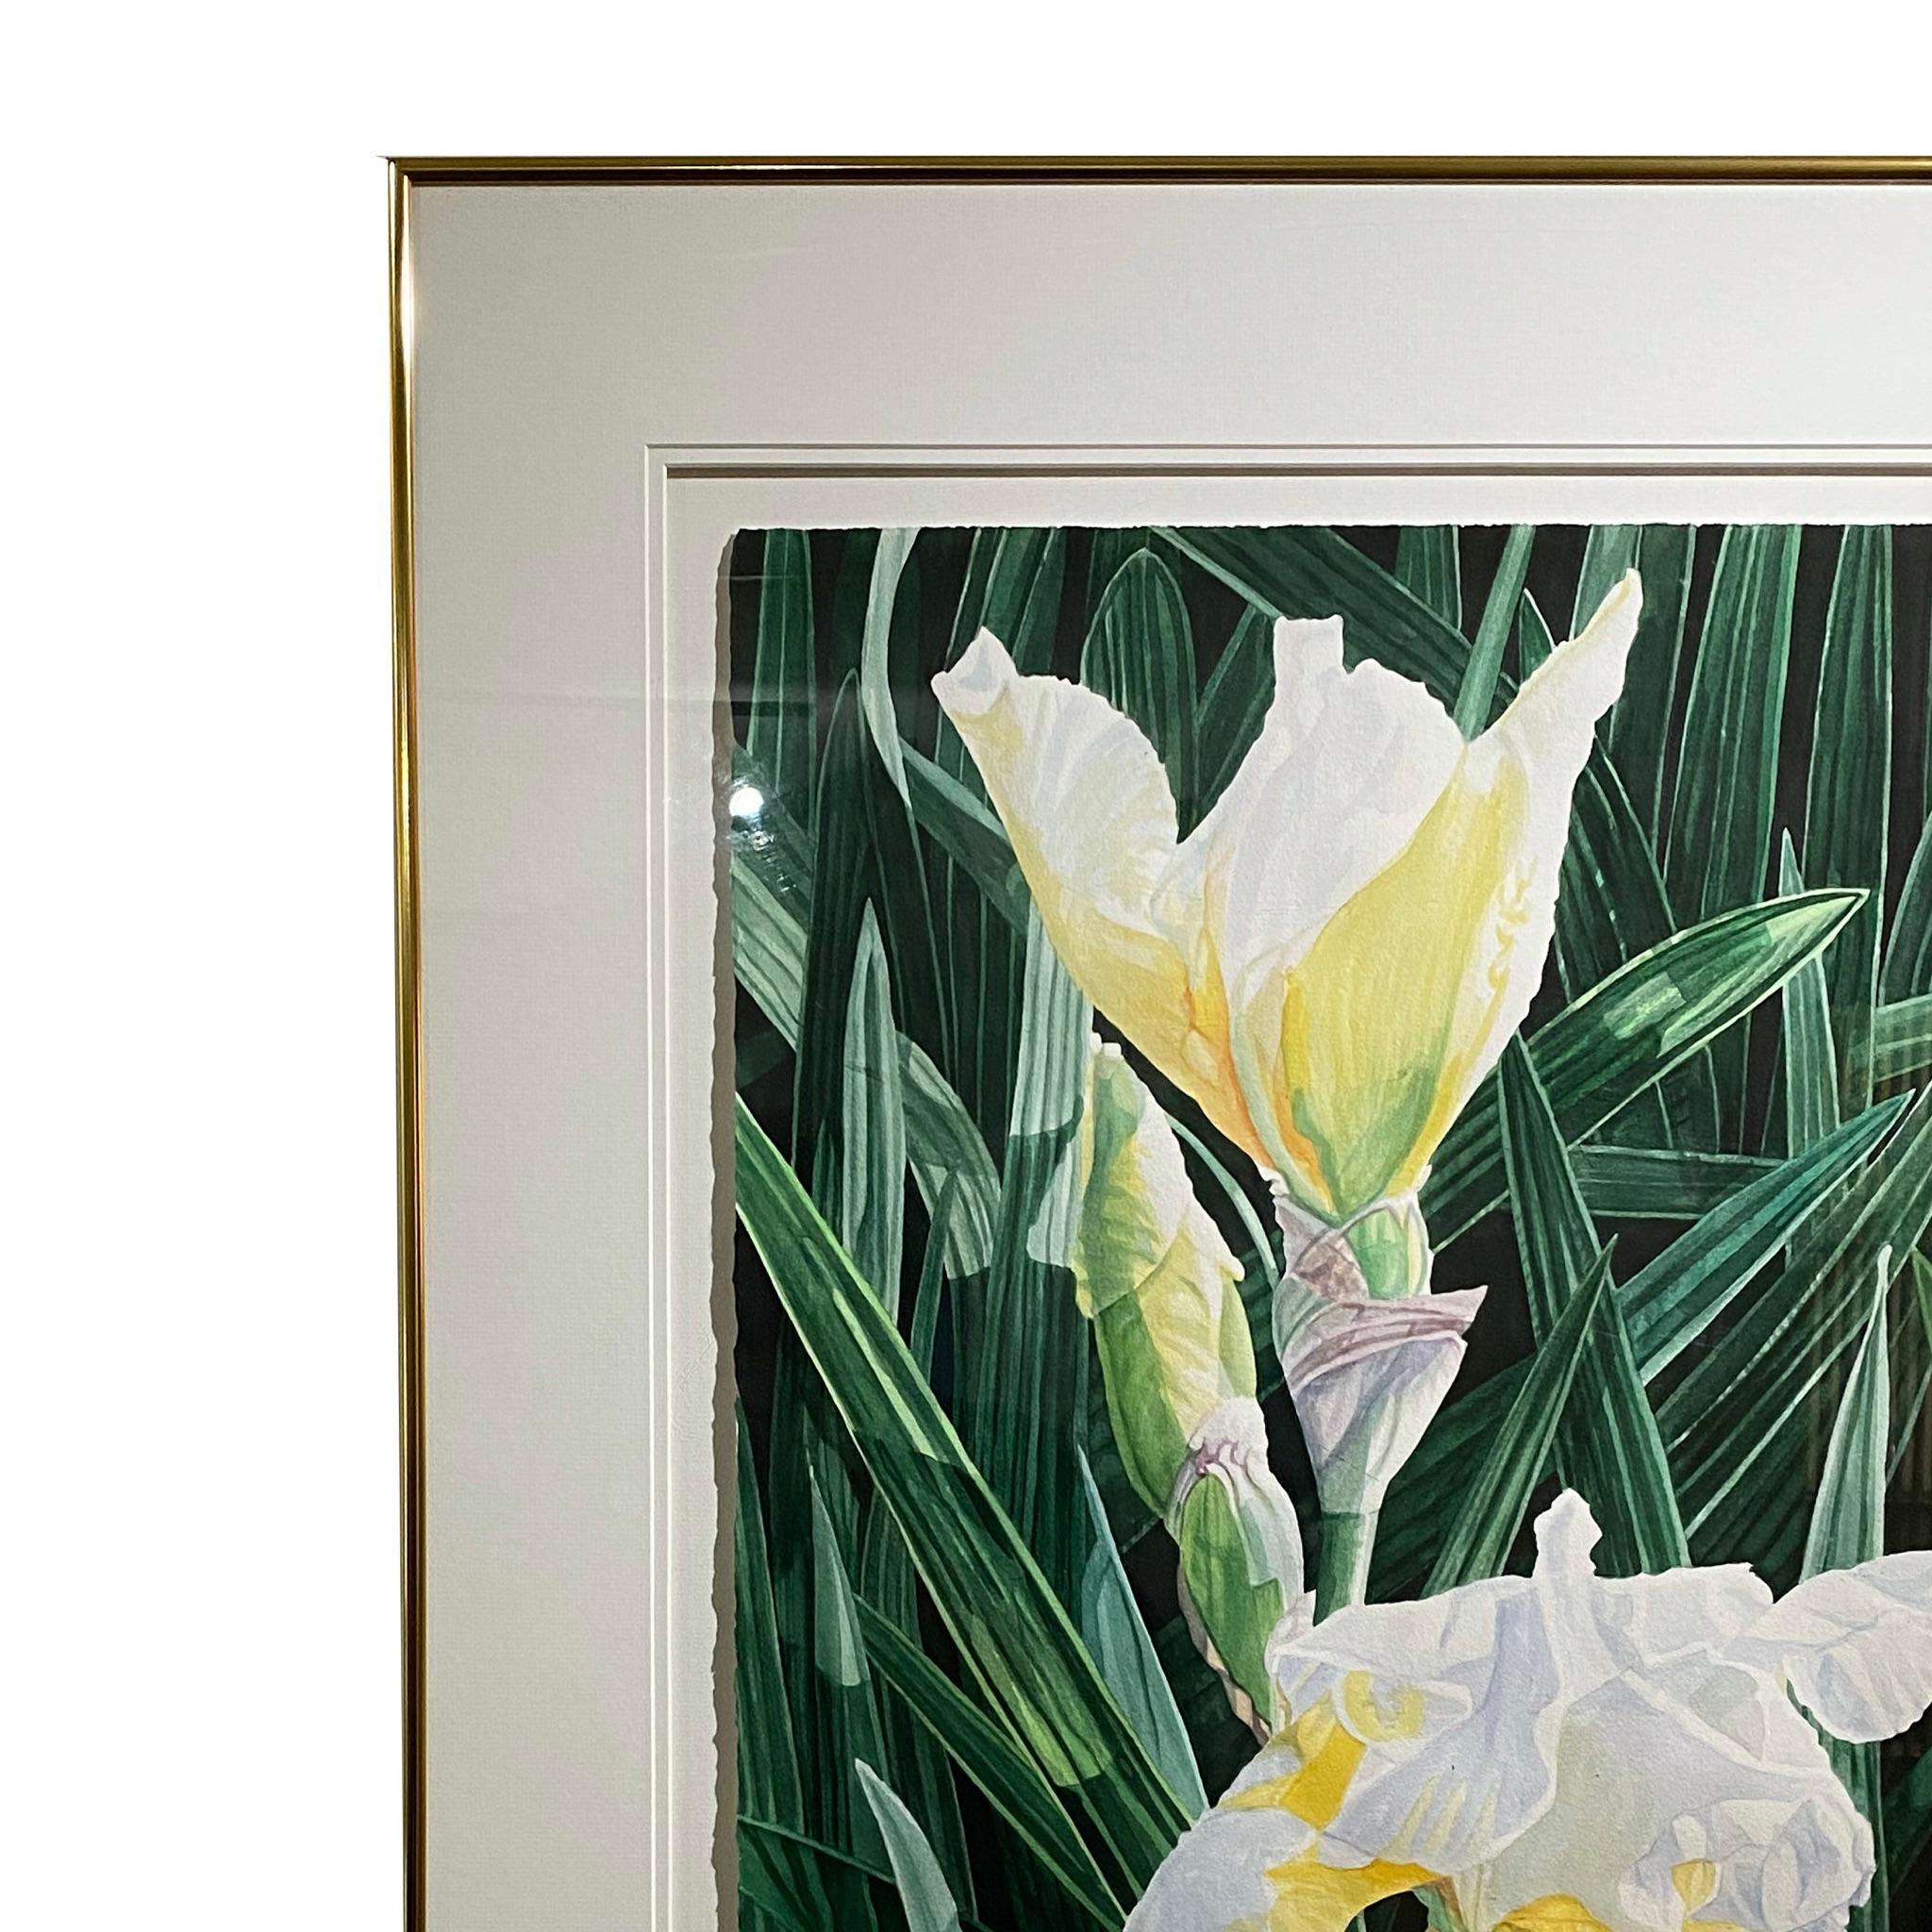 Very Beautiful water color of white Iris and beautiful green leafs setting a mood of clean floral elegance.
 Helen Burkett FSWS, FWS, SWS, NWS is originally from Arlington, VA, moved to Sarasota, FL in 1974, where she maintains her